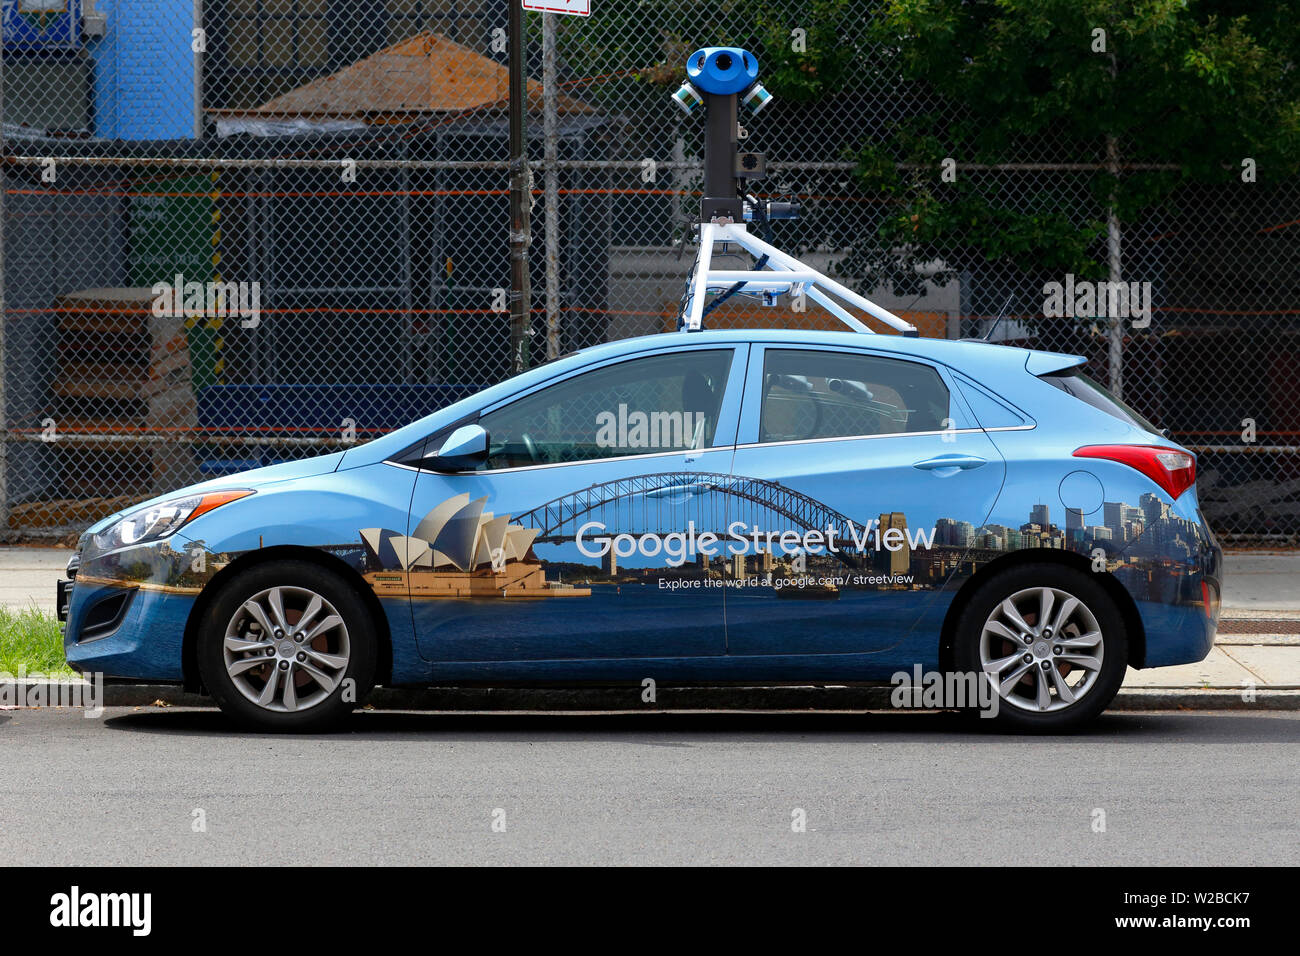 A Google Street View mapping vehicle Stock Photo